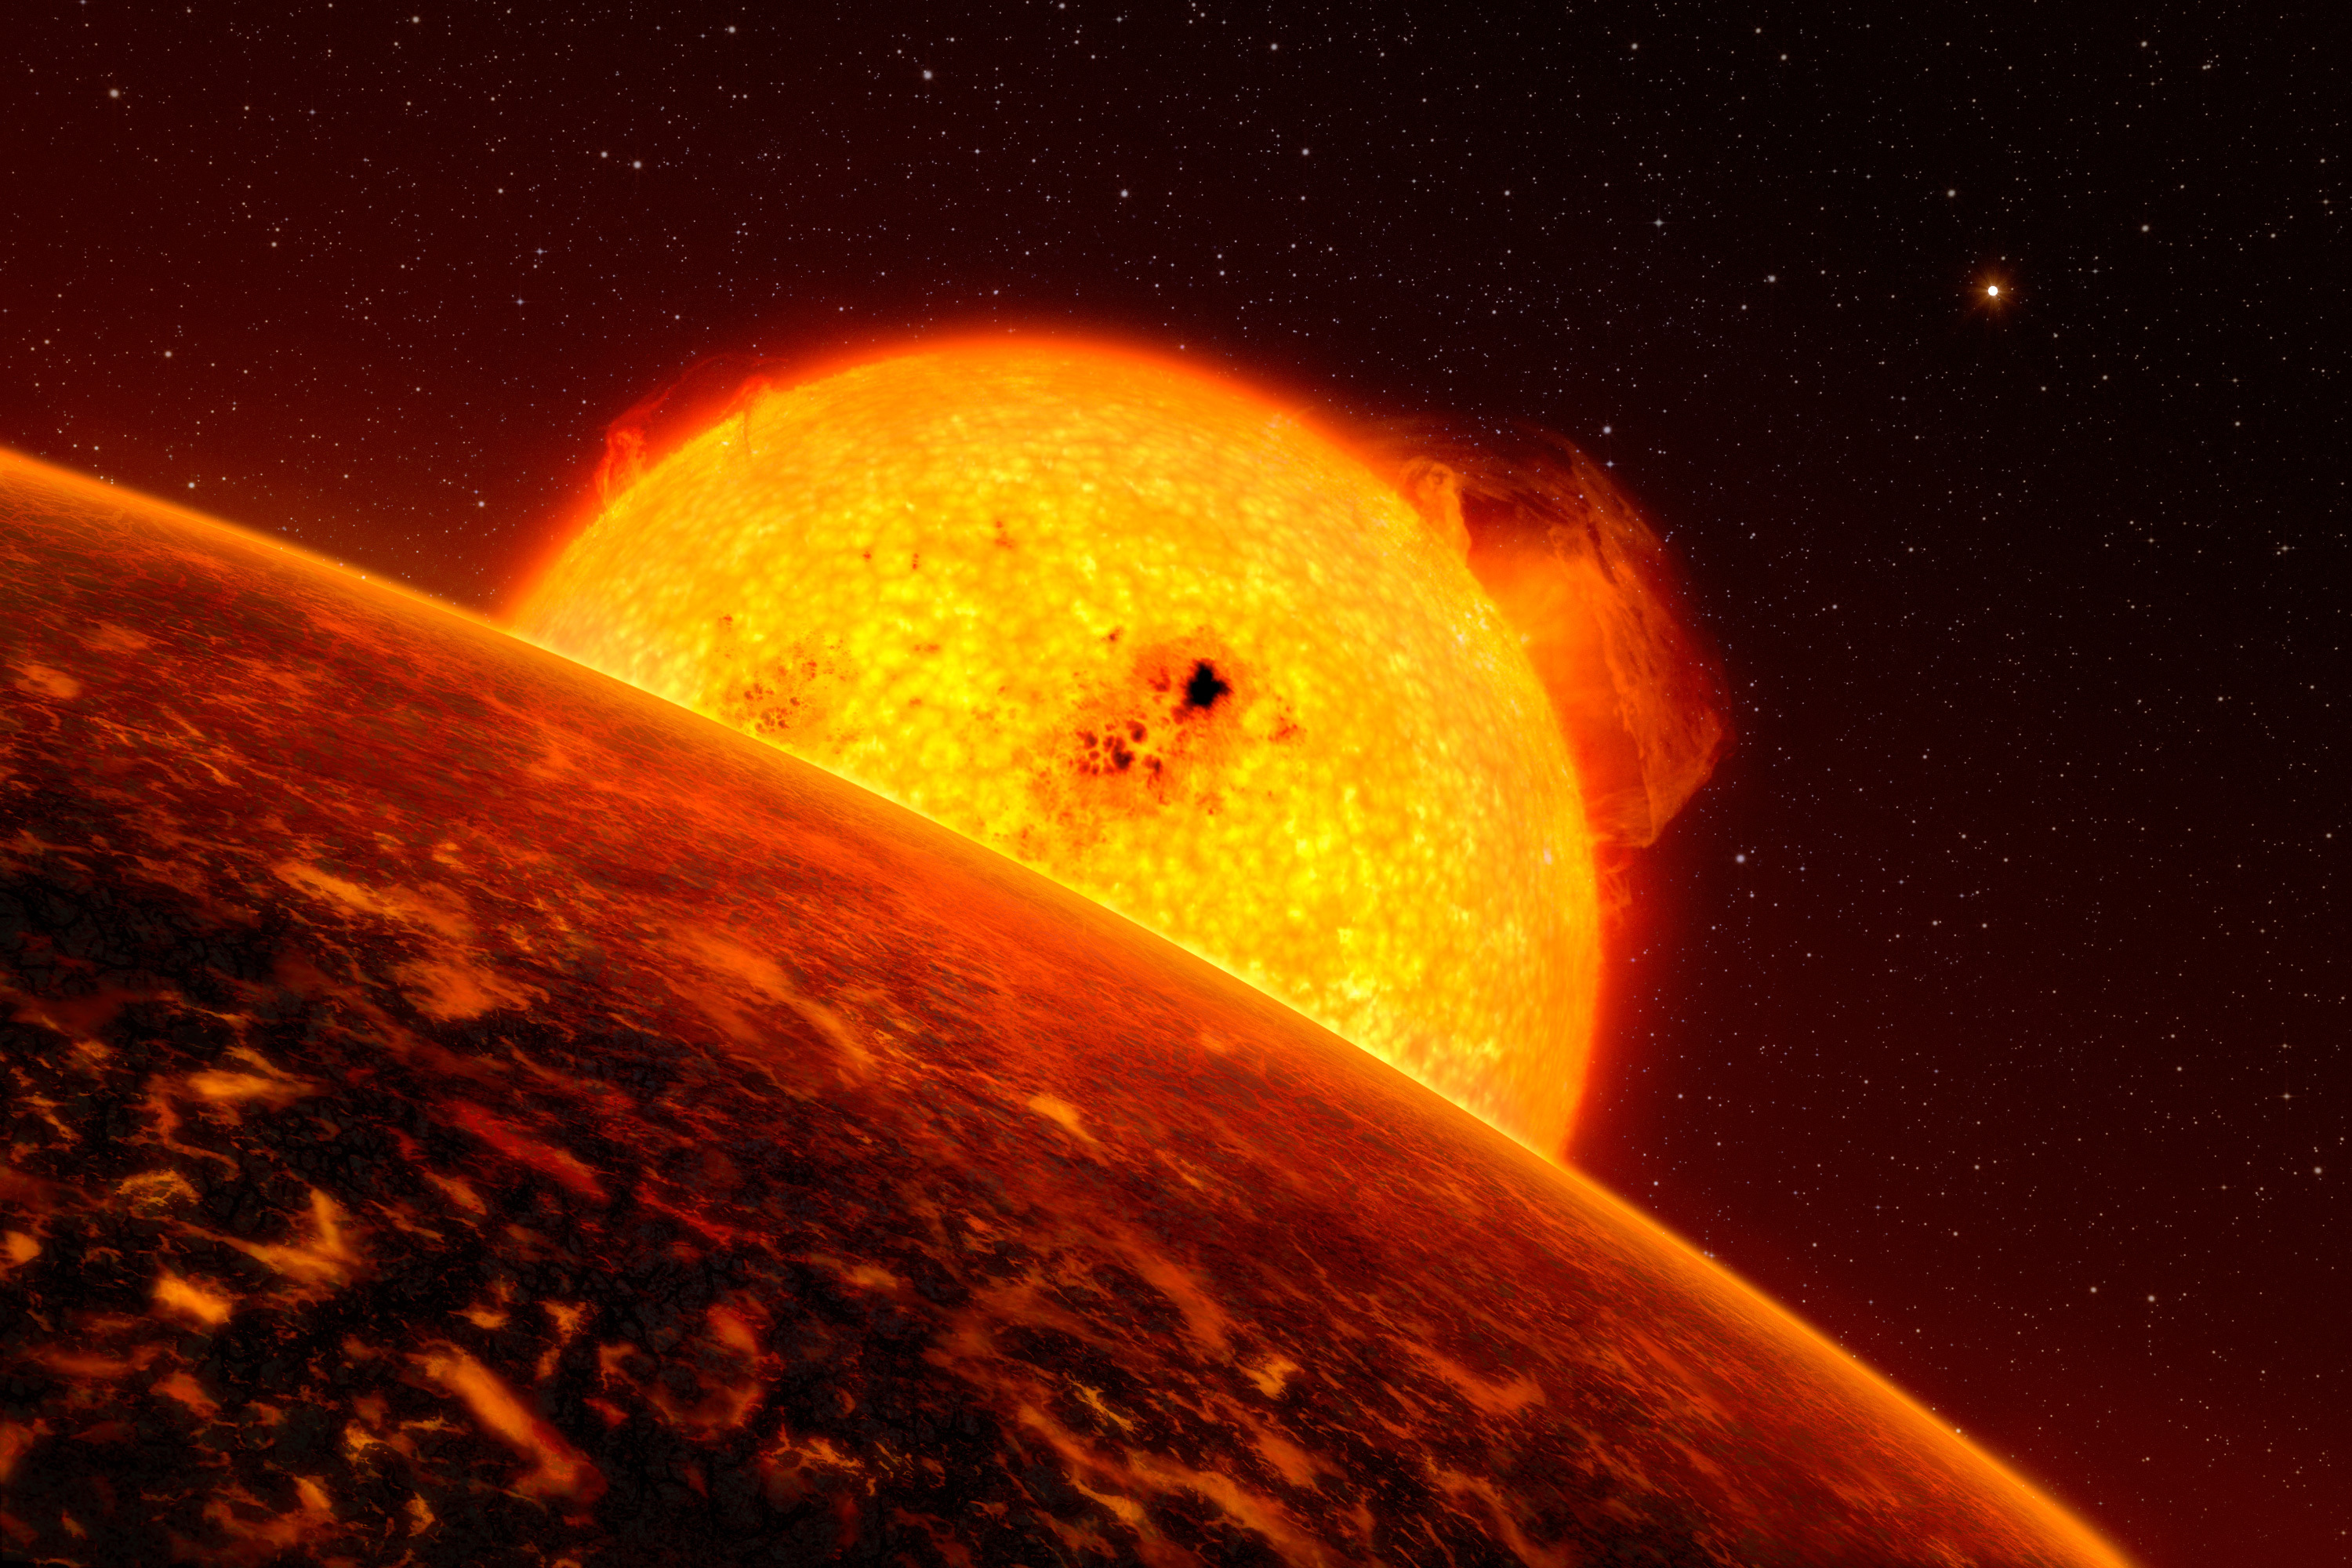 Artist’s impression of CoRoT-7b by ESO